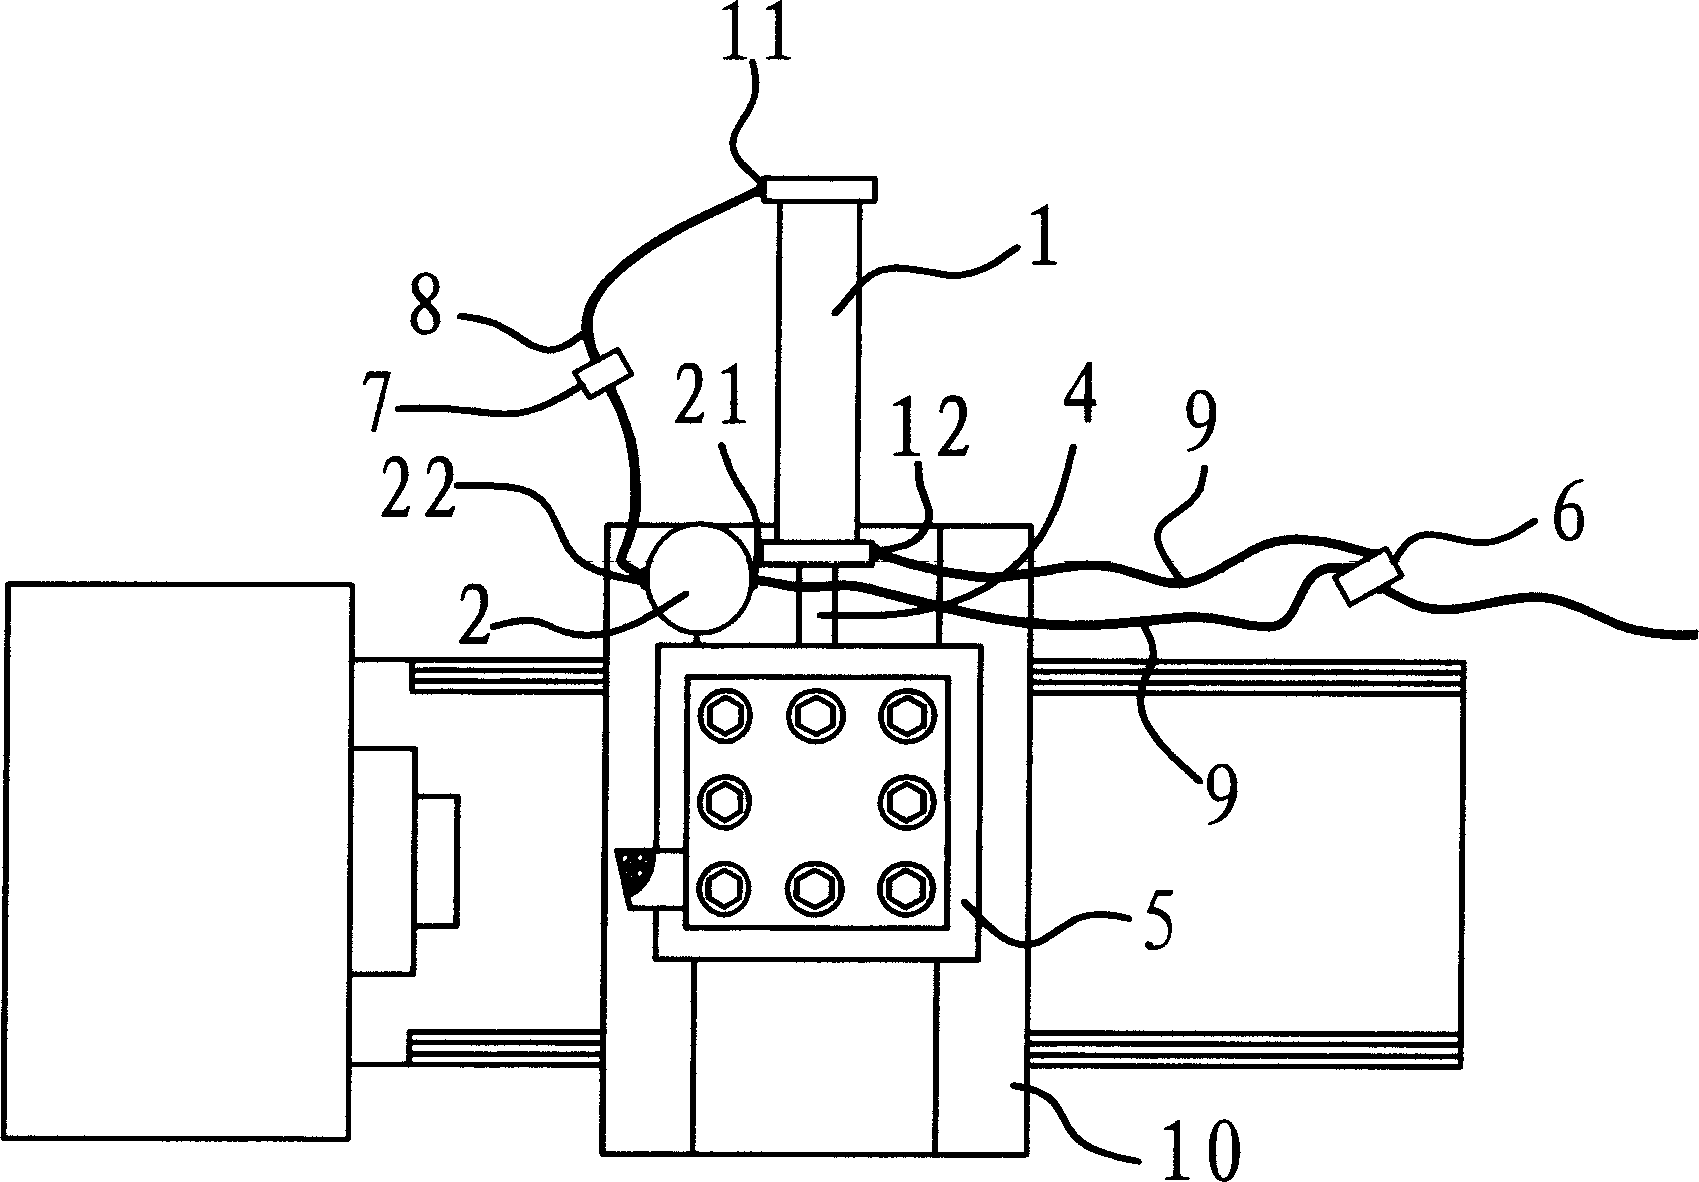 Carriage control device of instrument lathe